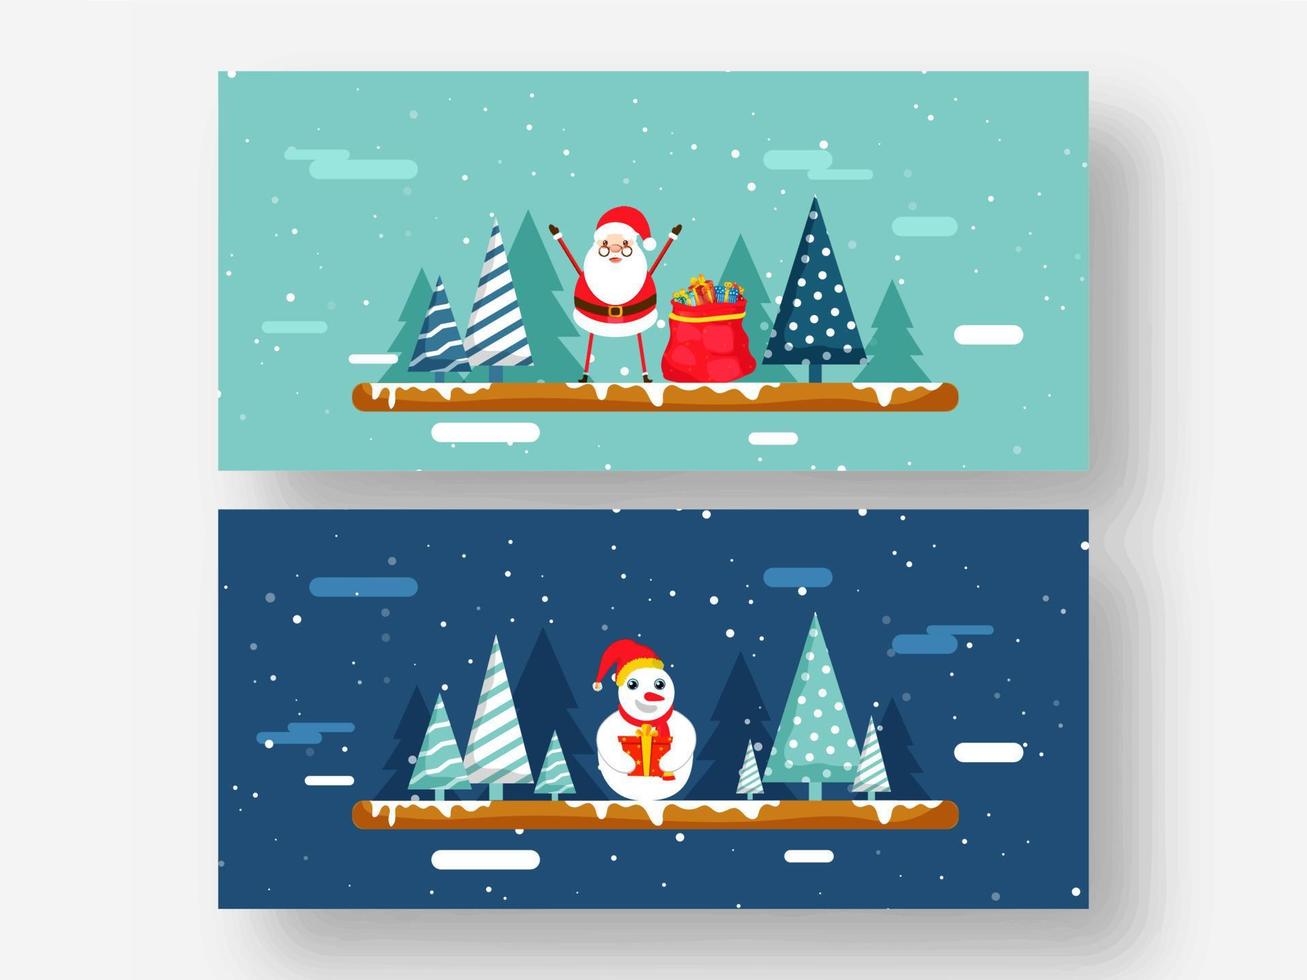 Illustration of Happiness Santa Claus with Snowman Character, Gift Boxes and Xmas Trees on Snowfall Background in Two Color Option. vector